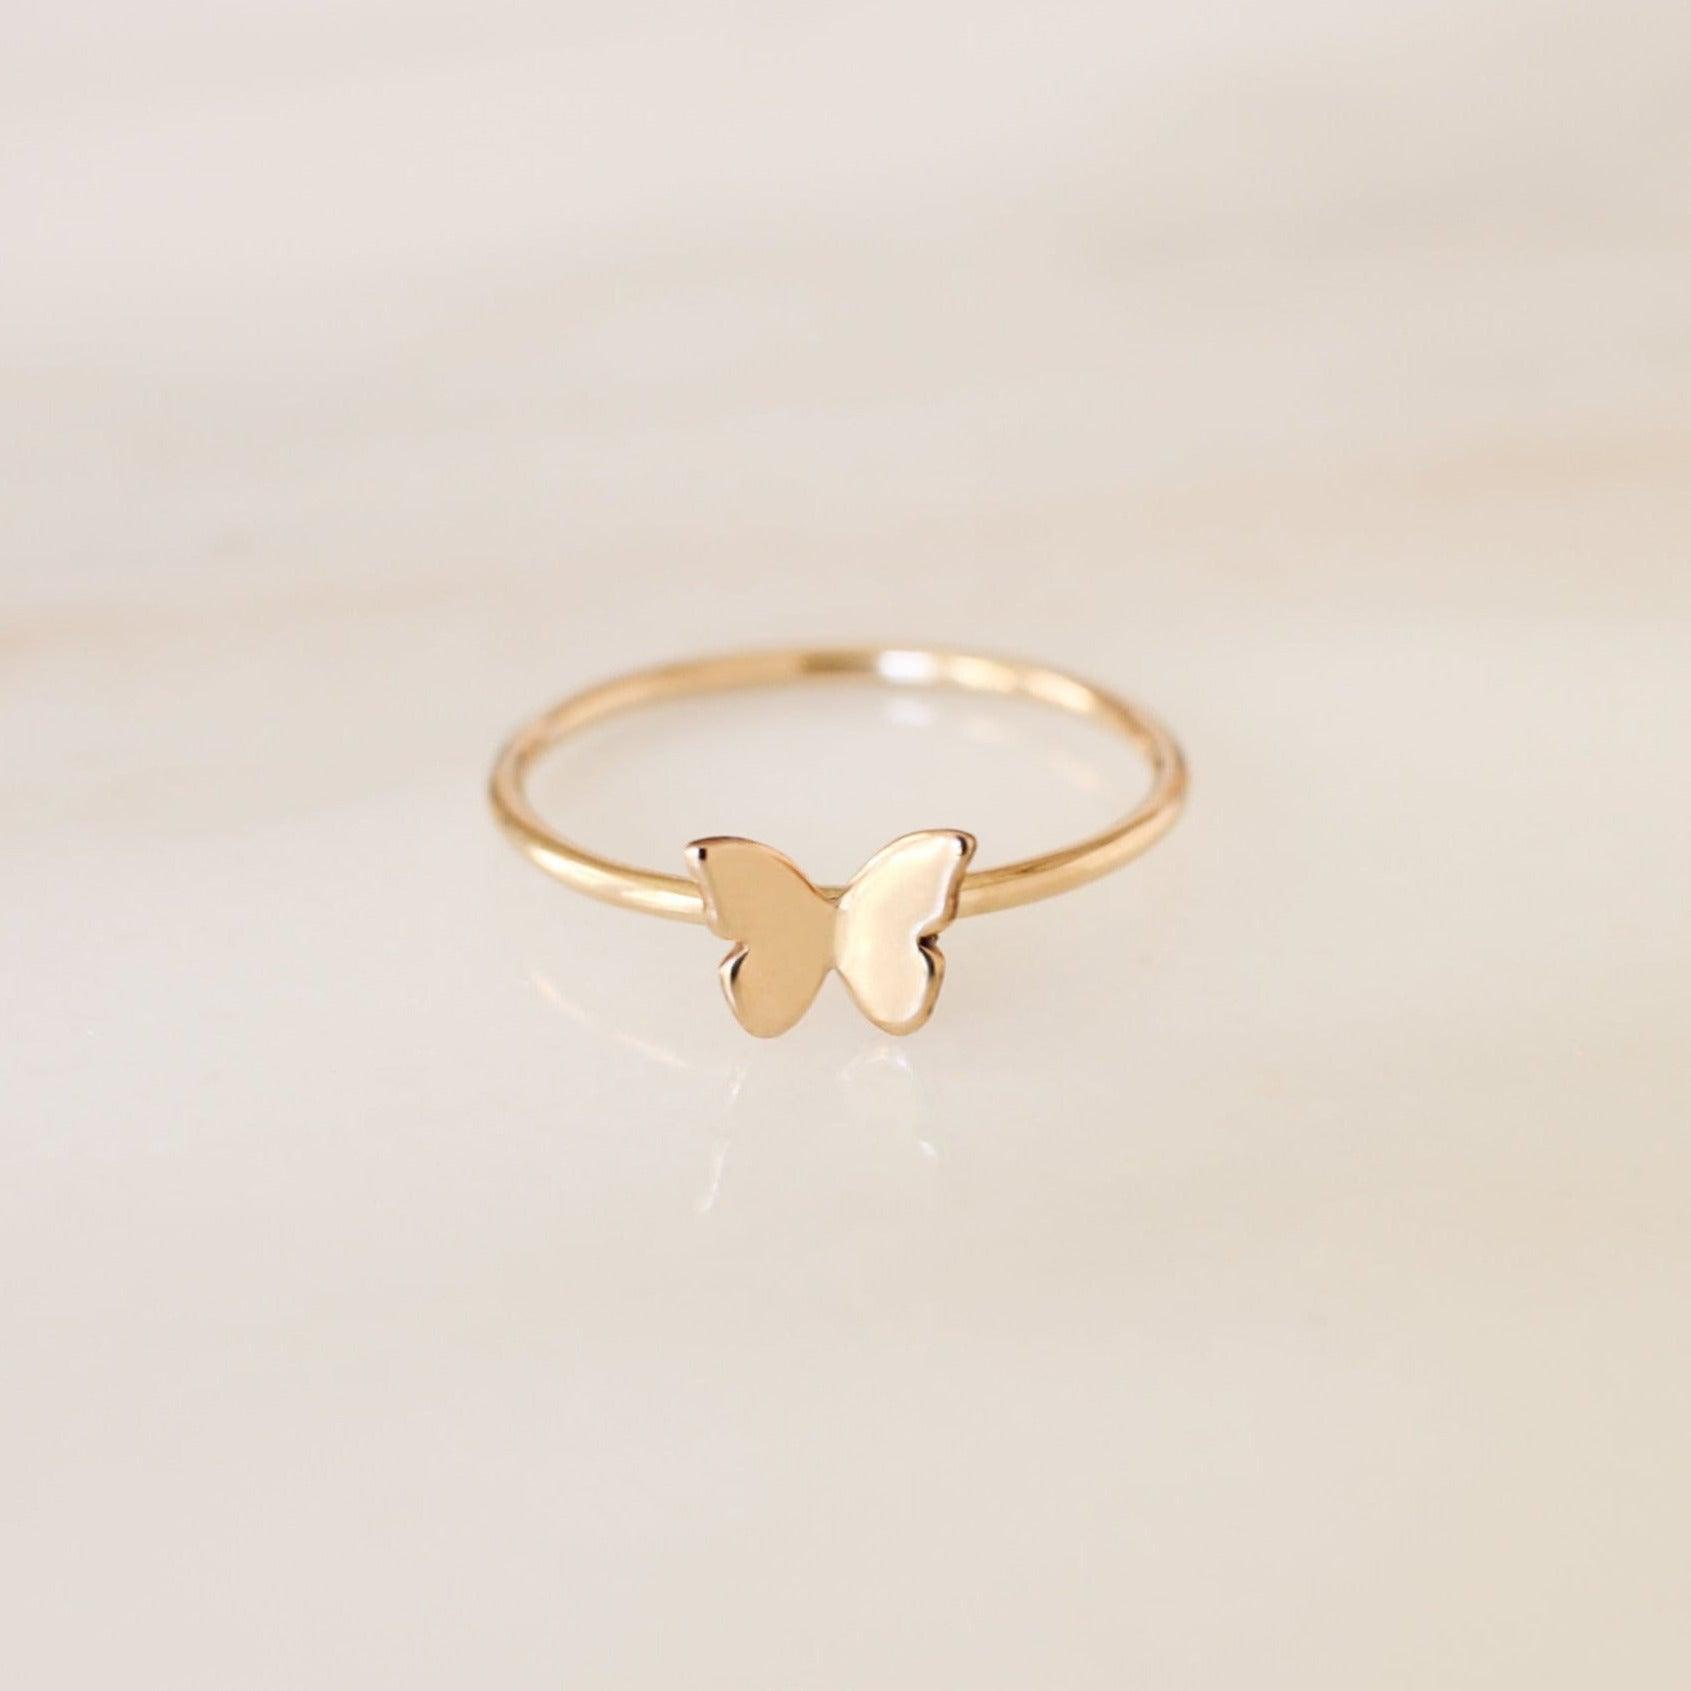 Butterfly Ring - Nolia Jewelry - Meaningful + Sustainably Handcrafted Jewelry